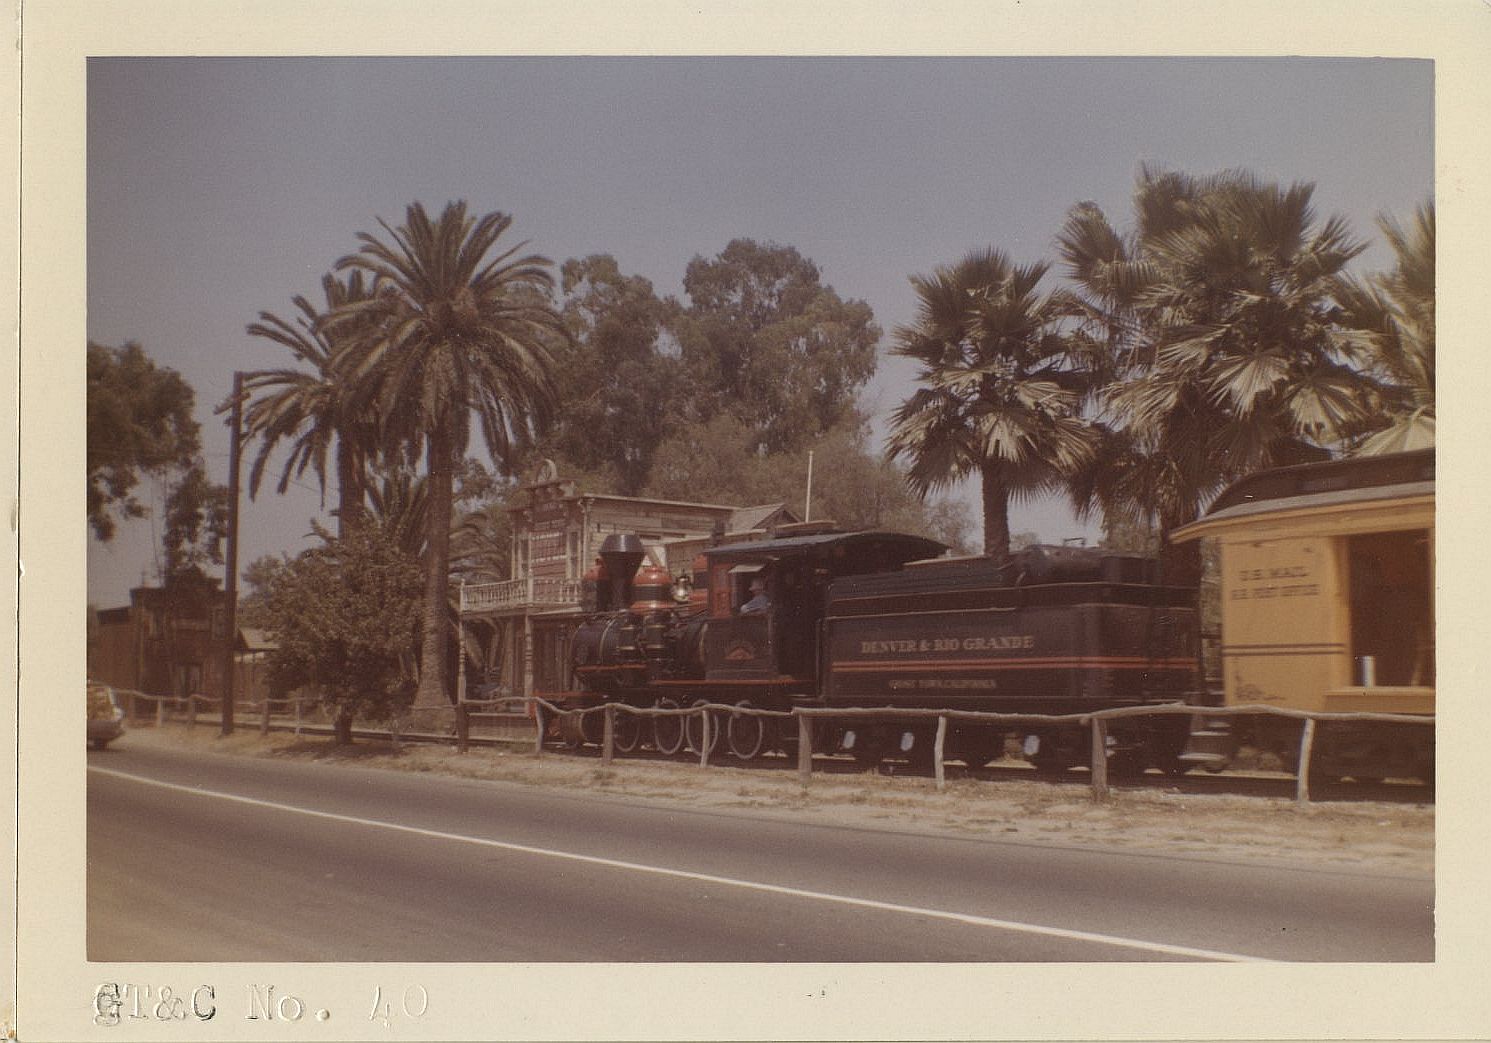 33-Passing through the old mainline town.jpg